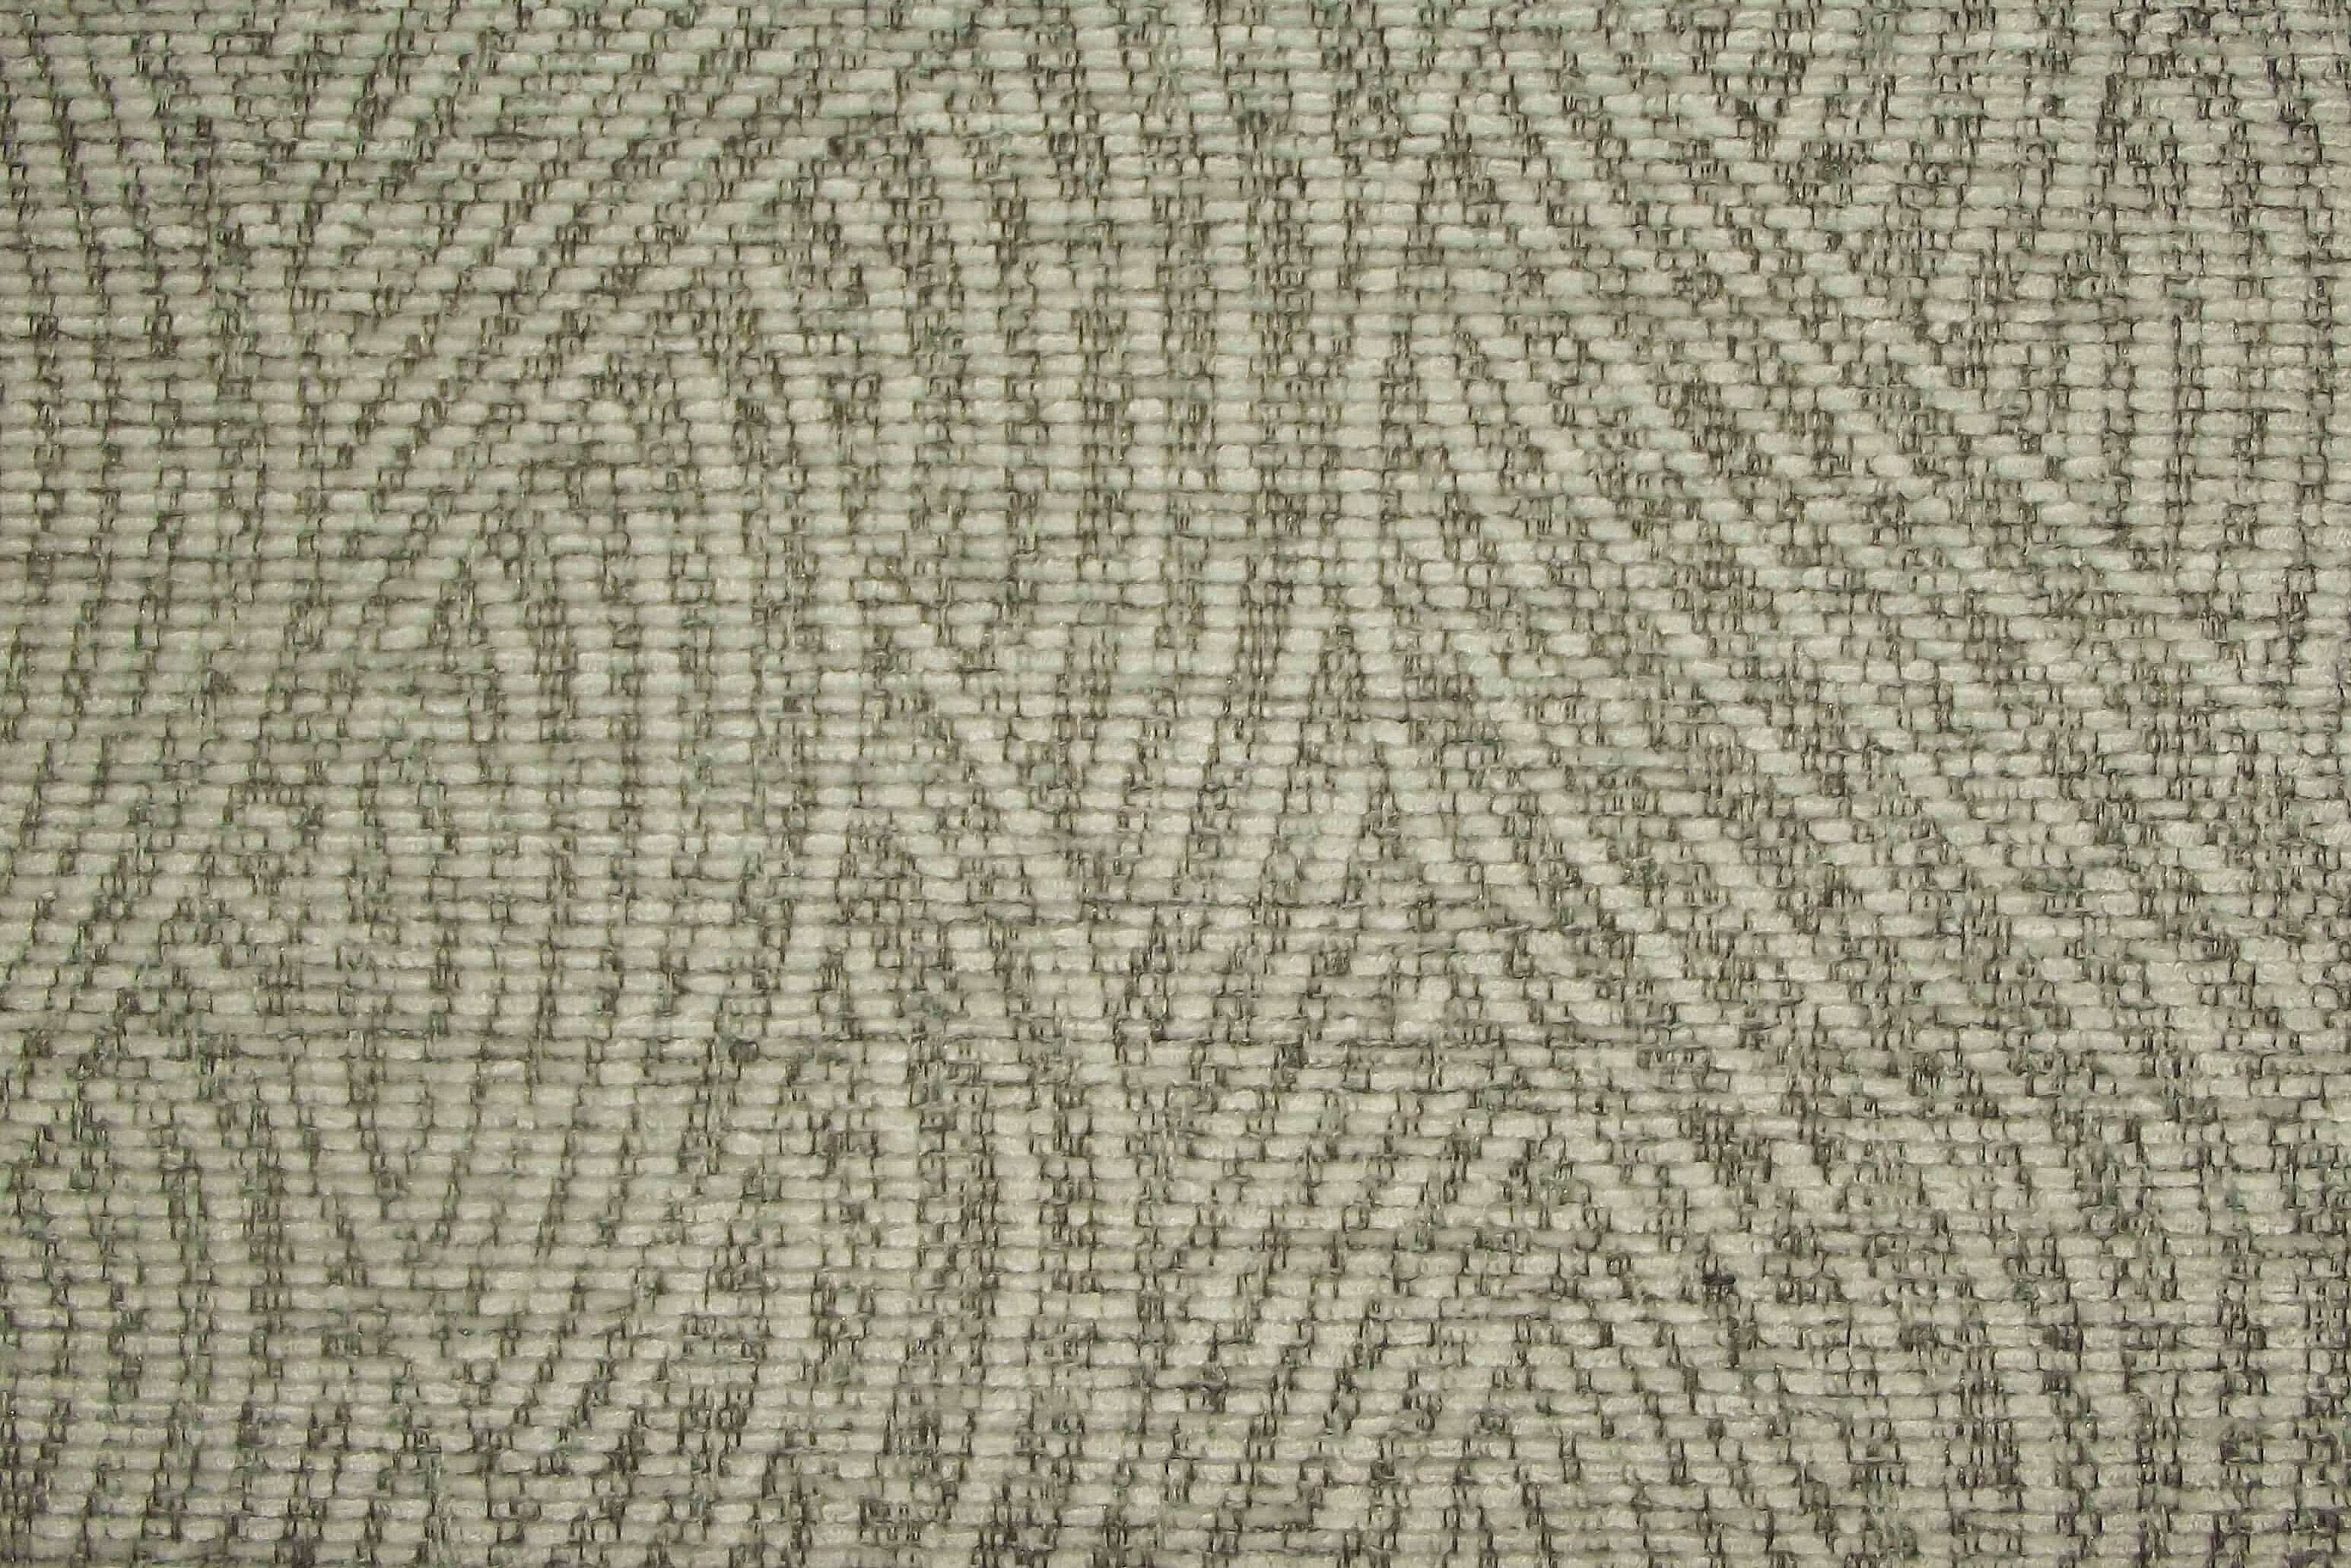 Ross Fabrics - A leading supplier of Upholstery Fabrics to the